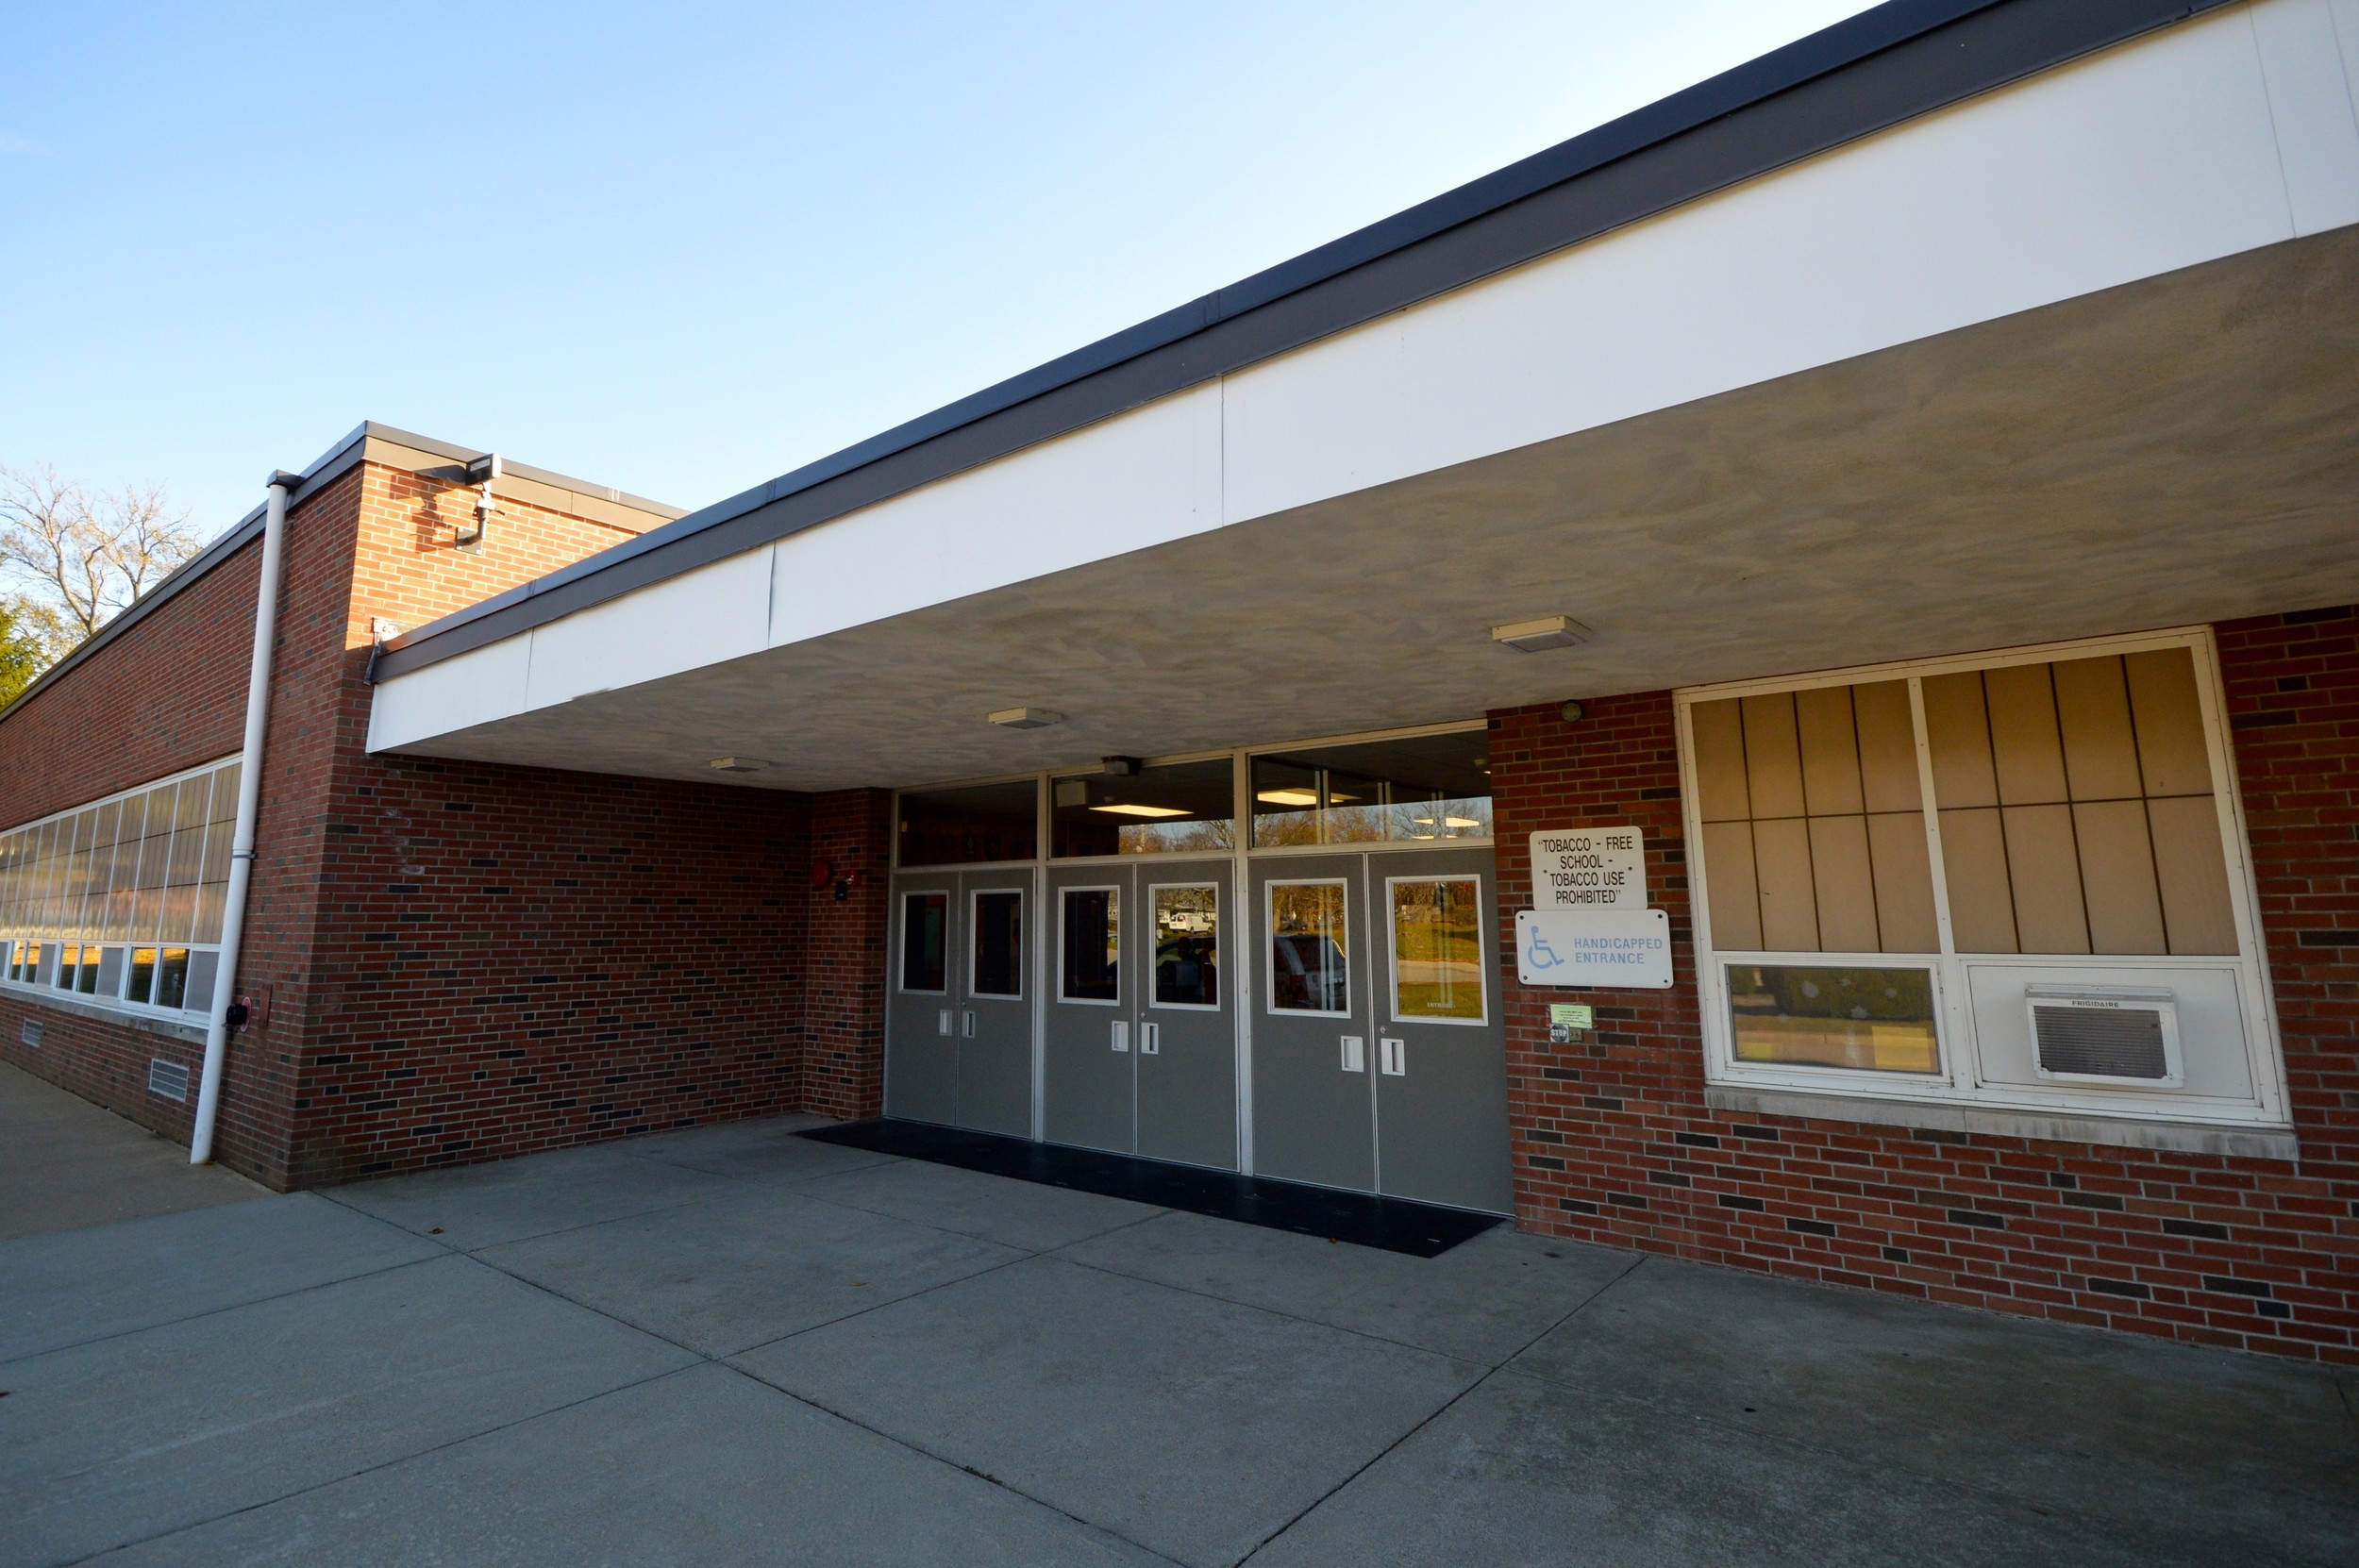 Melville School, one of Portsmouth's two public elementary schools, would add three fourth-grade classrooms if a plan being studied by the district were approved.